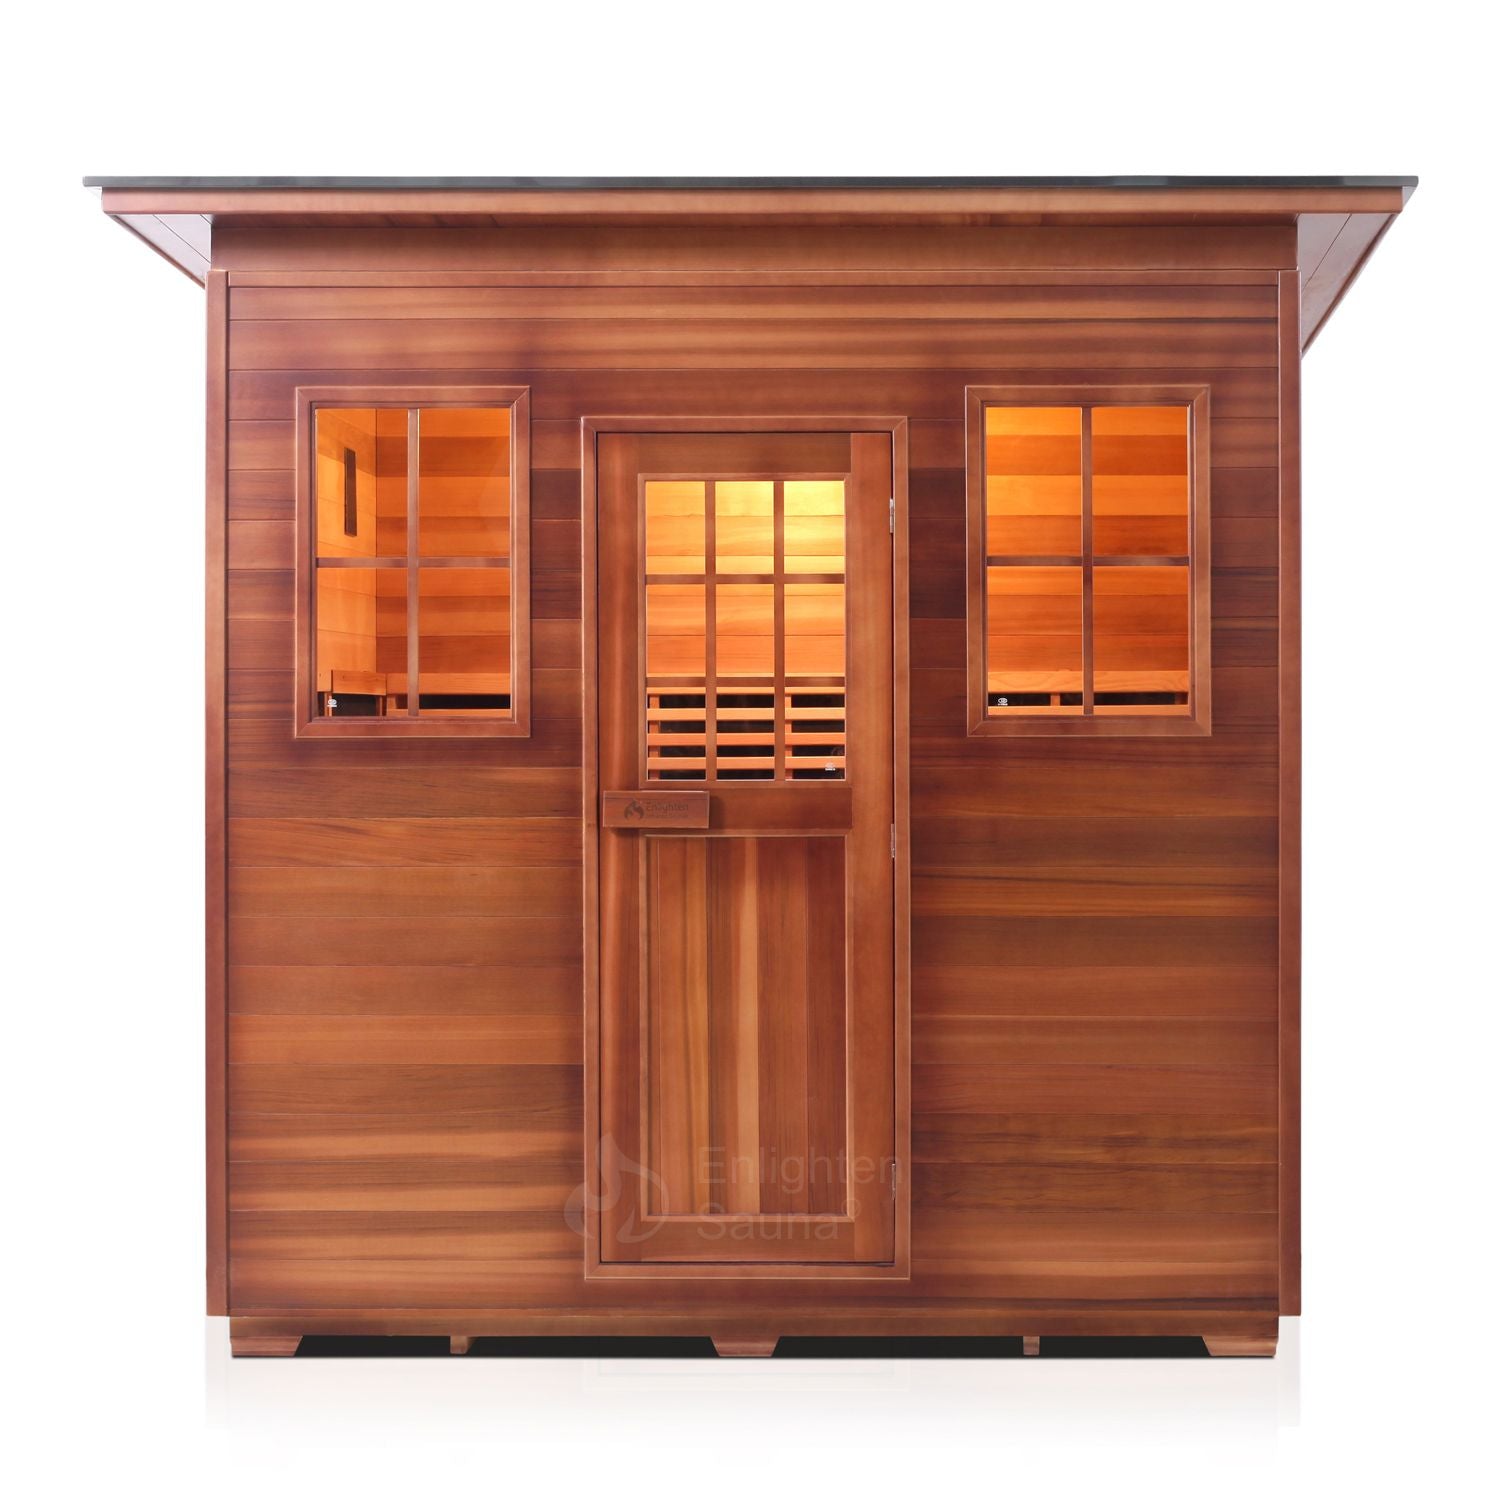 Enlighten Sauna Sierra 5 Person Slope Roof with front facing view in white background